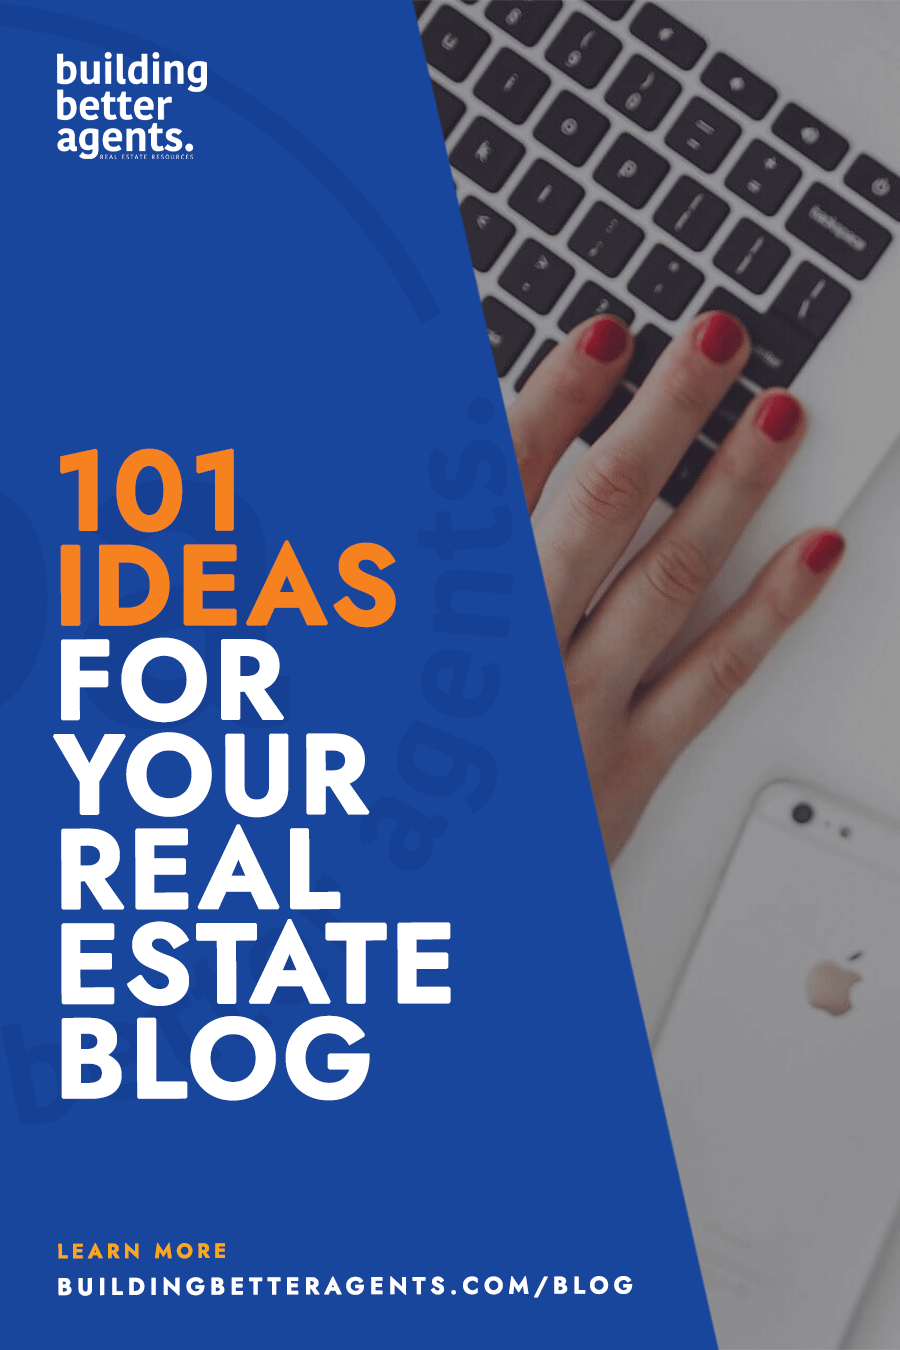 101 Ideas for Your Real Estate Blog